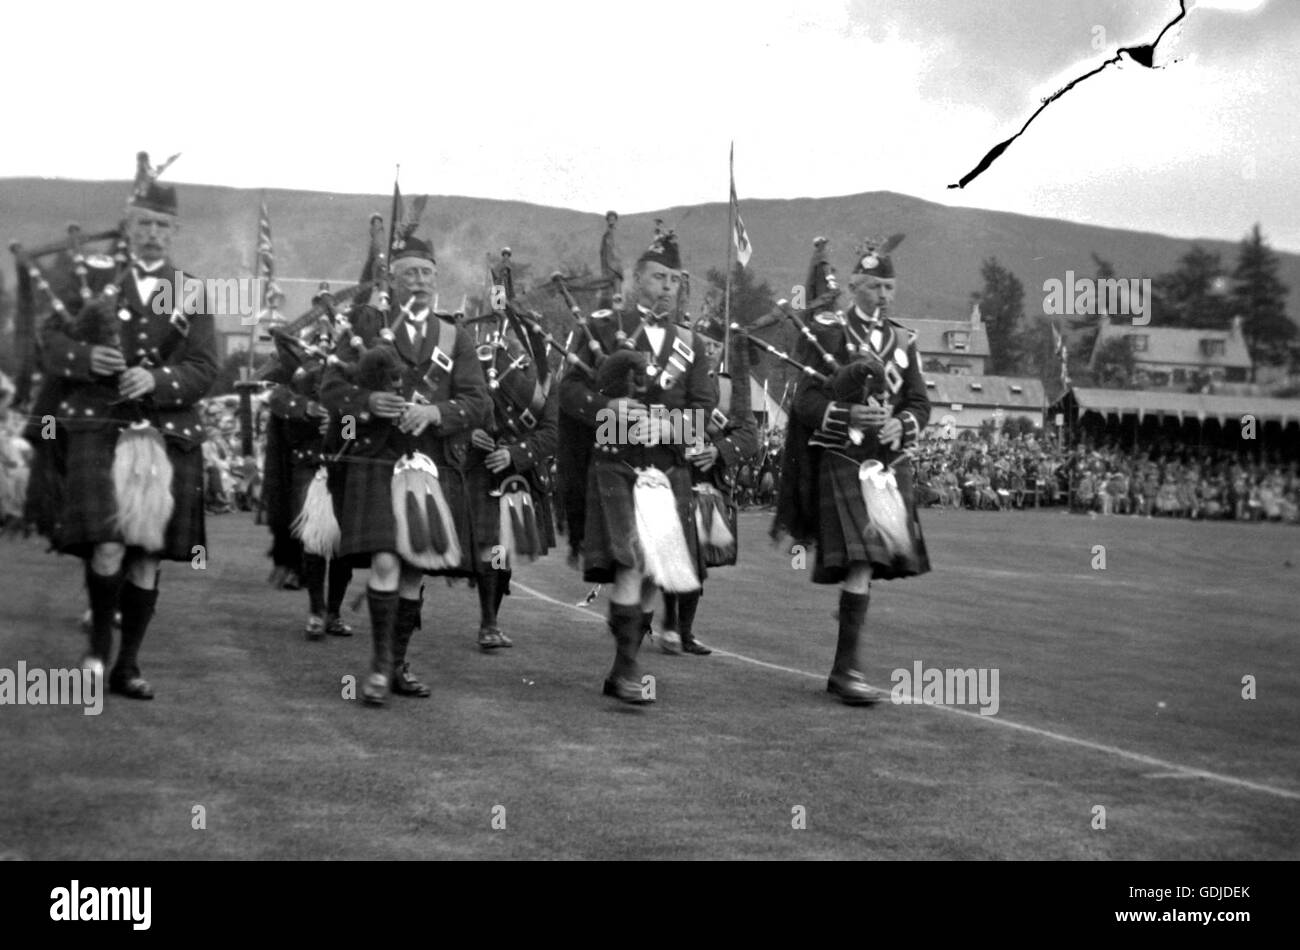 Pipers play at a Highland Games in Scotland, location unknown. c 1935.Photograph by Tony Henshaw Stock Photo